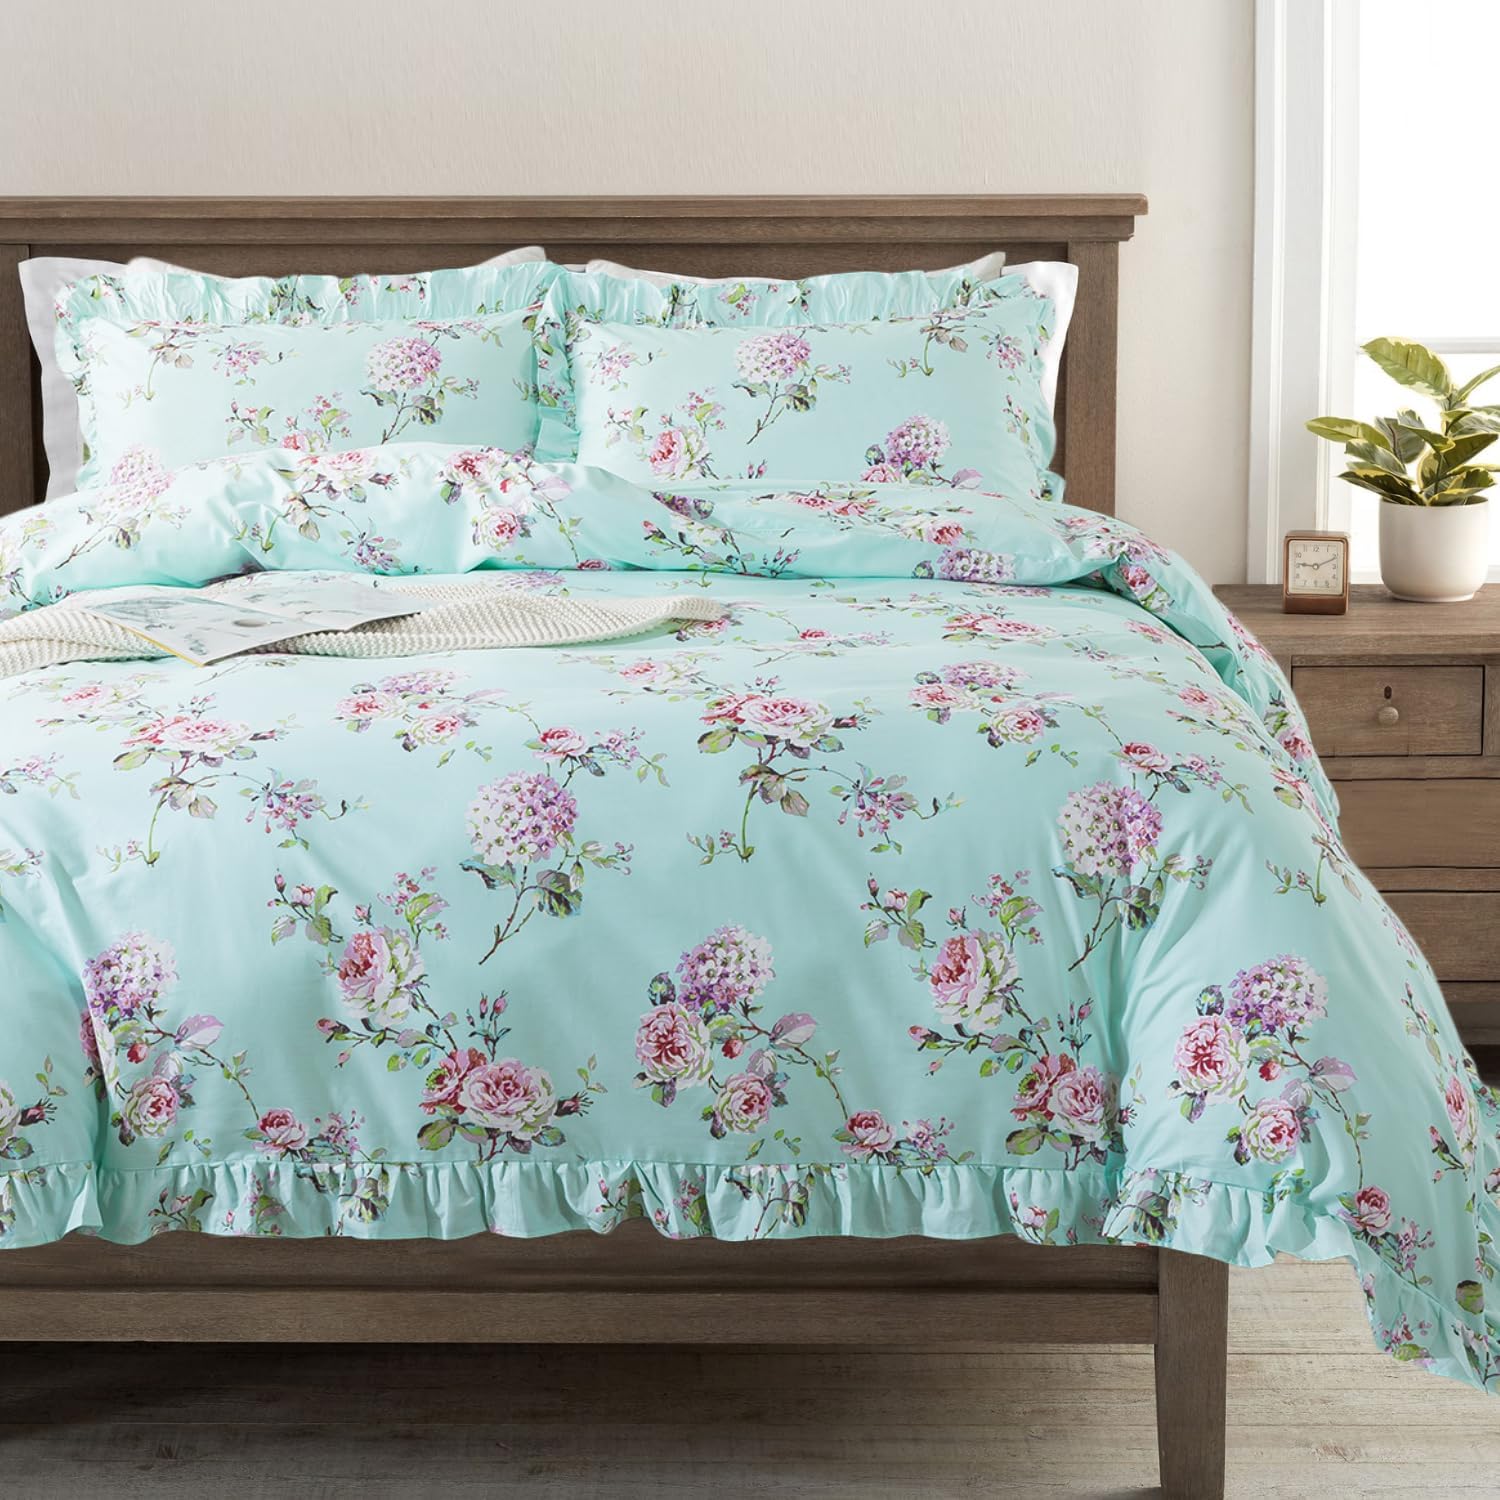 FADFAY Floral Duvet Cover Set Queen Size 100% Cotton French Country Bedding Hydrangea Flower Comforter Set Soft Breathable Shabby Vintage Ruffle Bed Cover with Hidden Zipper 3 Pcs, Queen